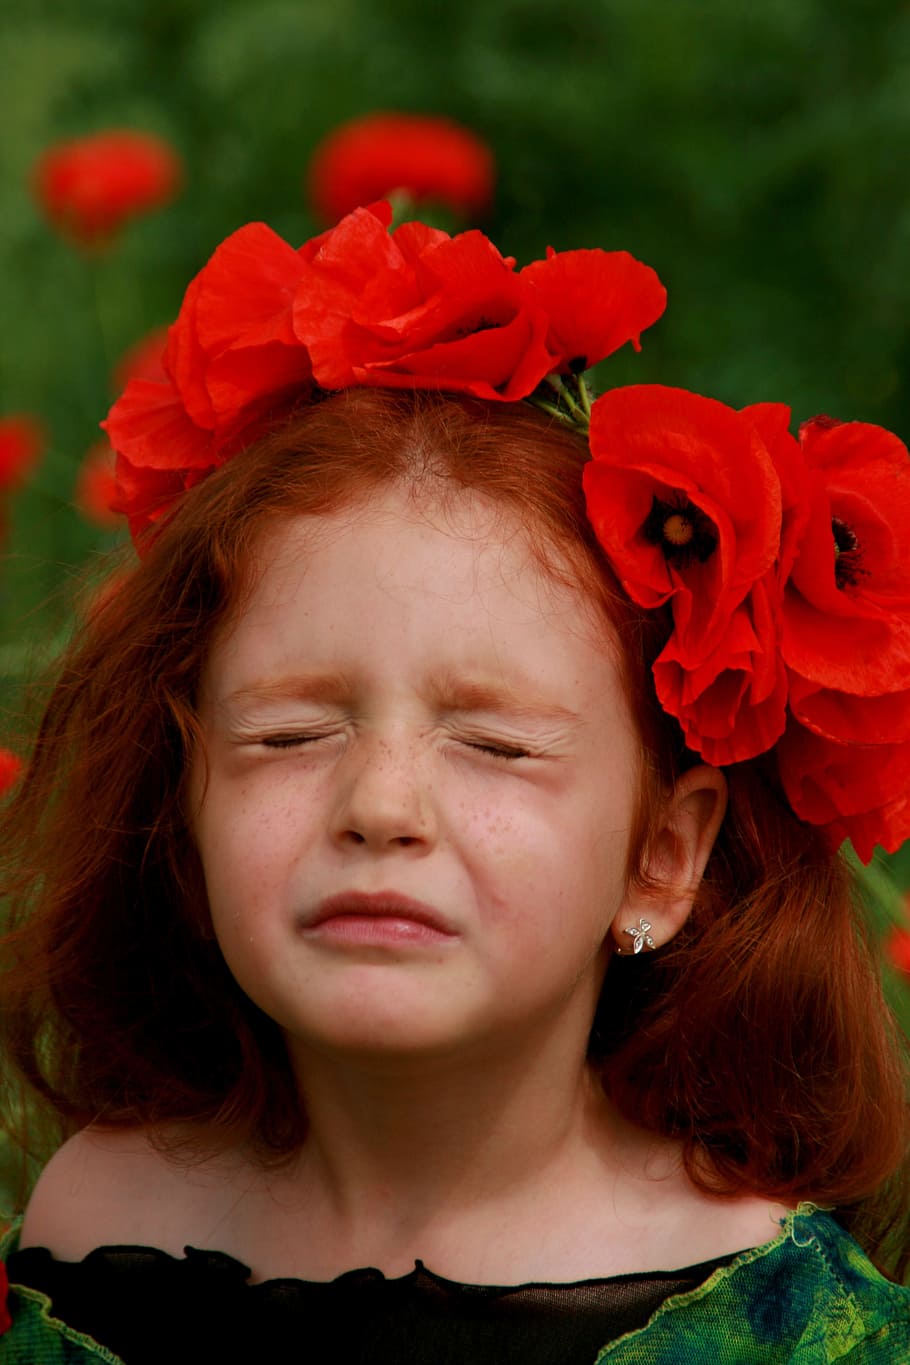 girl, poppies, red, red hair, camp, flower, fantasy, story, child, childhood